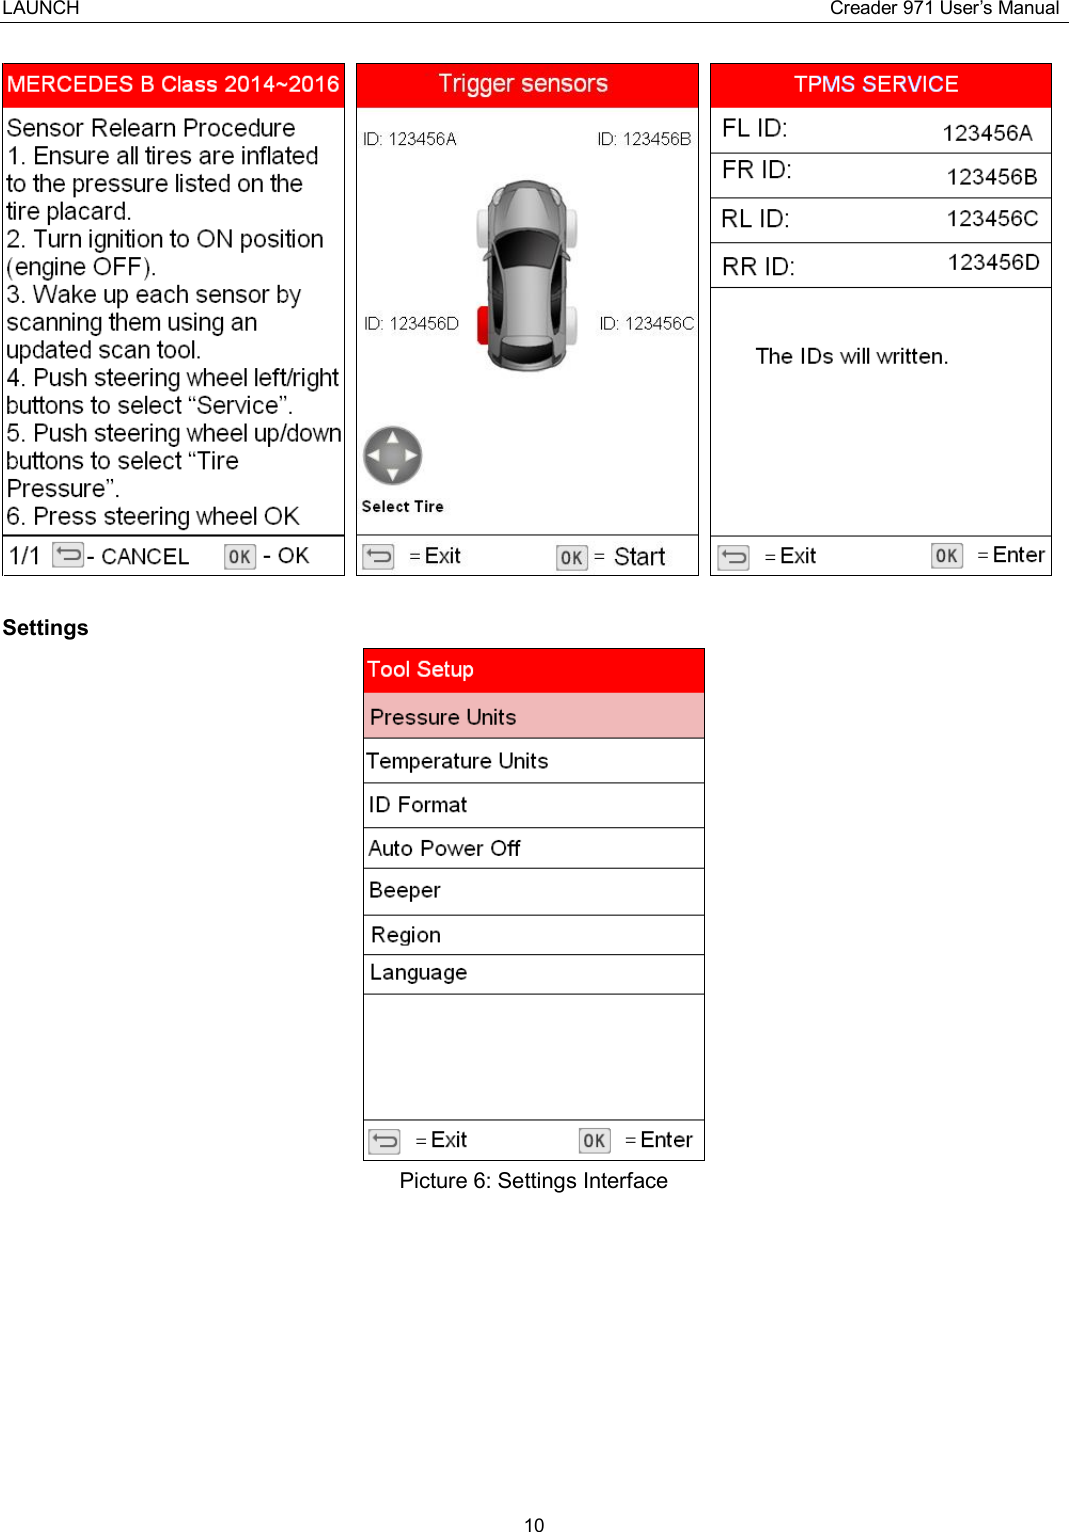 LAUNCH                                                                                Creader 971 User’s Manual 10      Settings  Picture 6: Settings Interface   